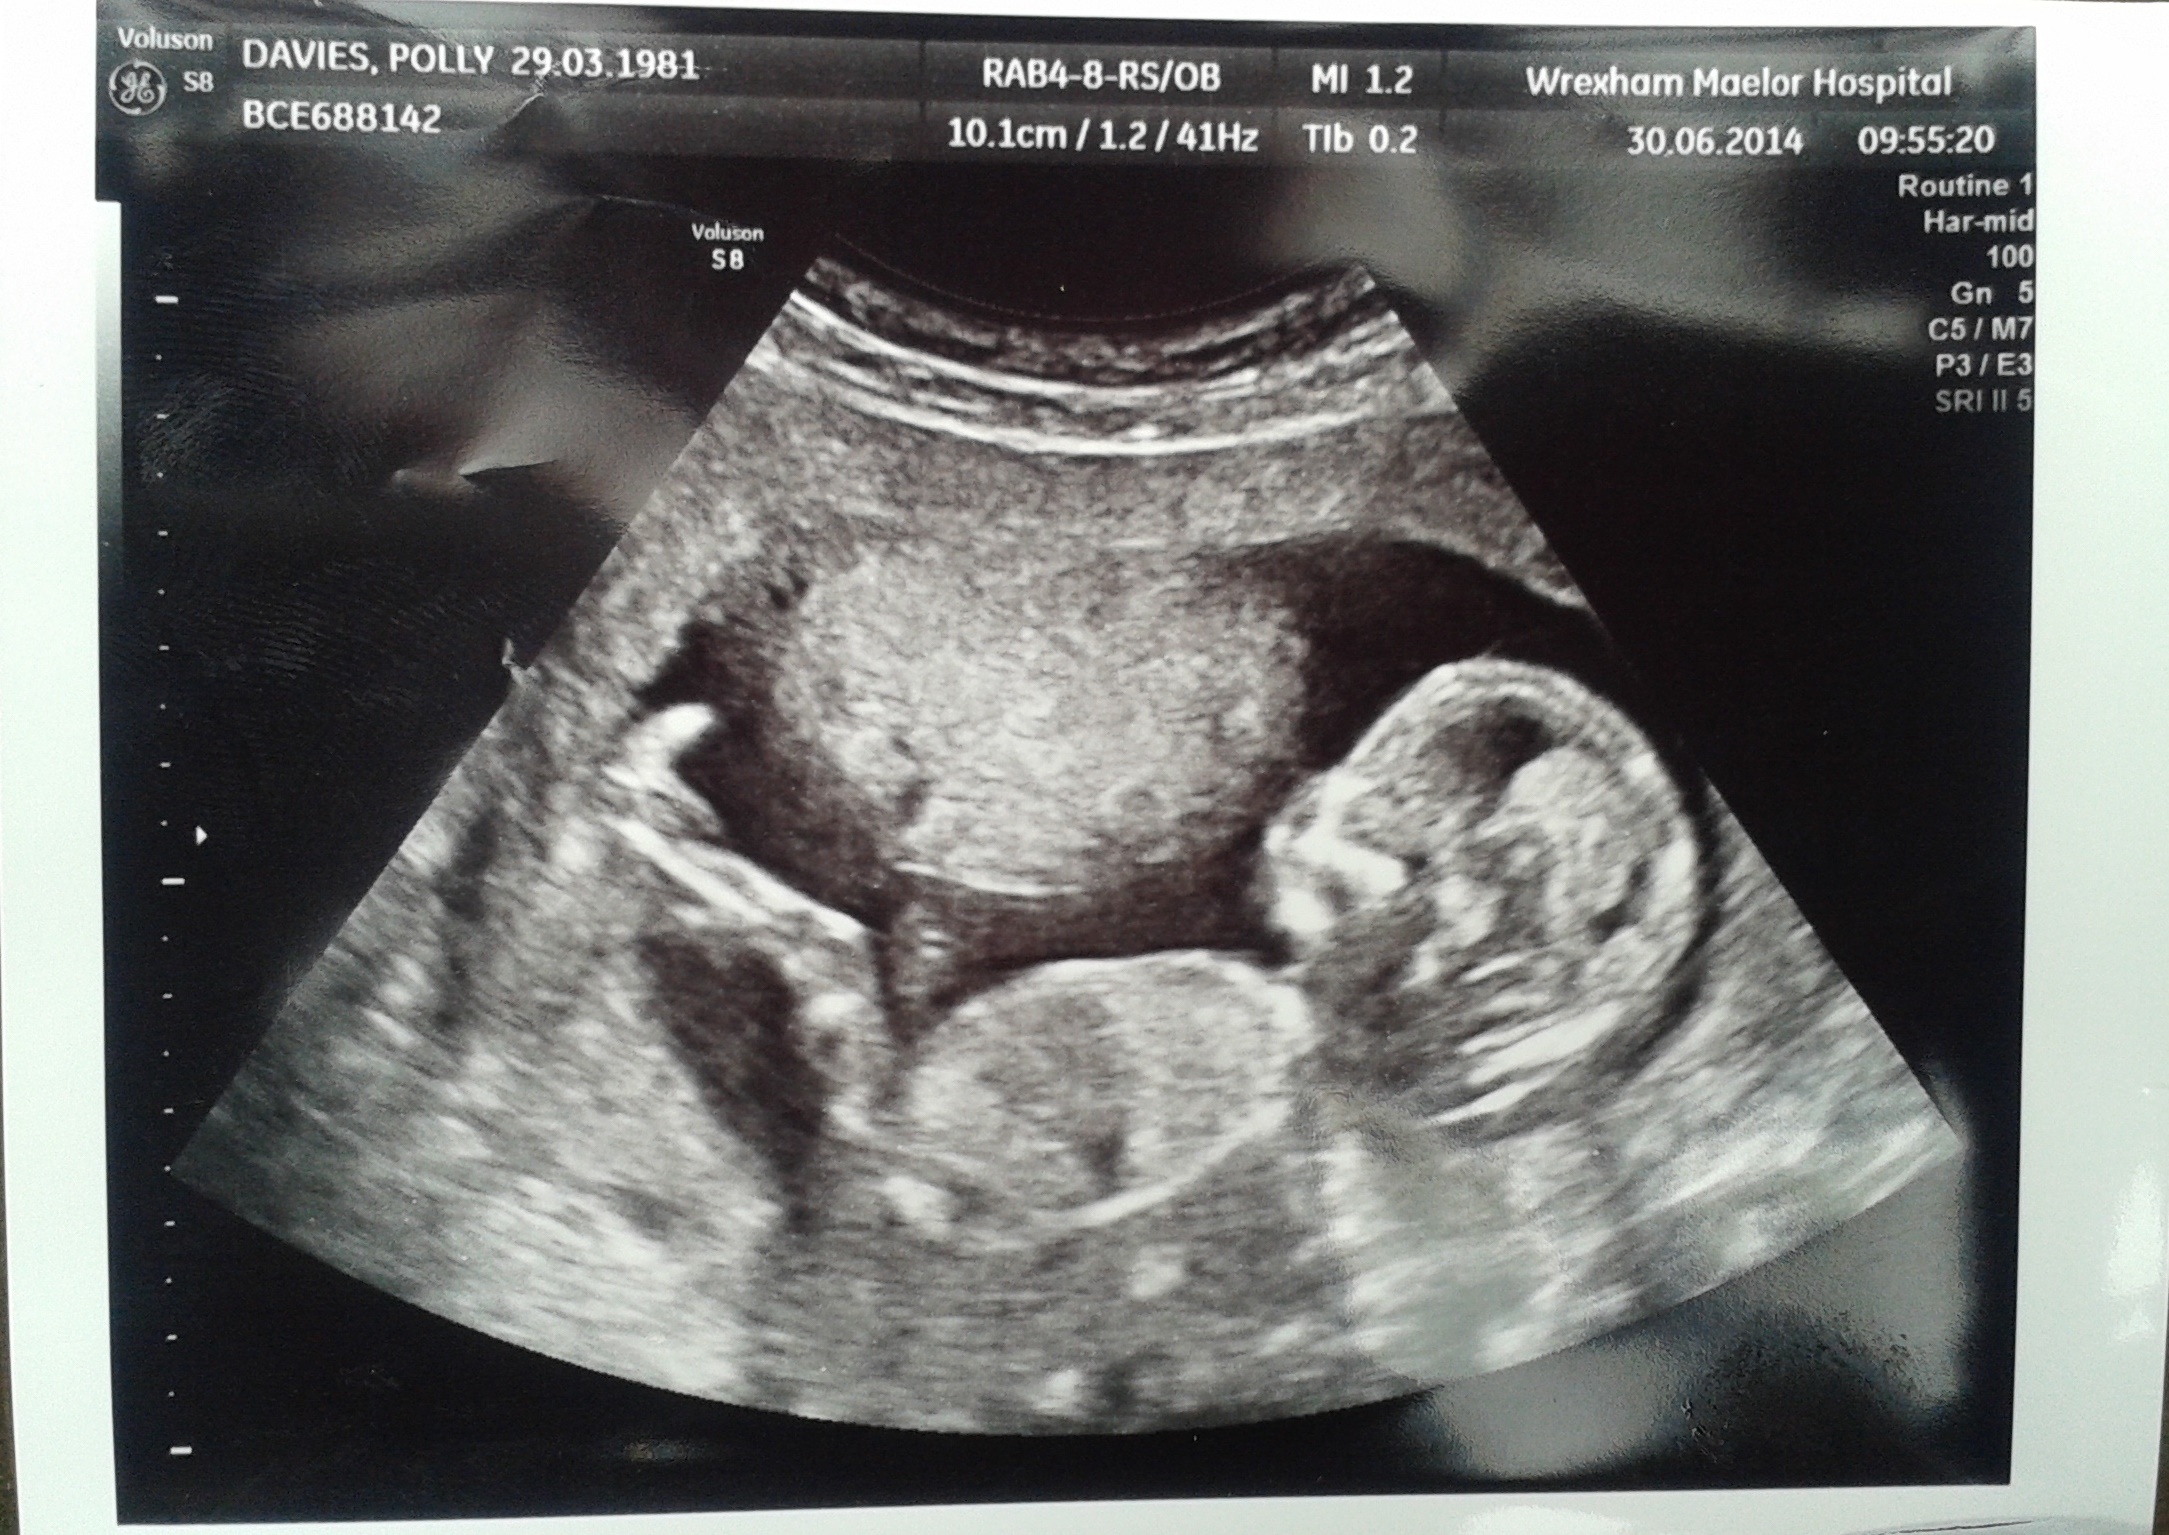 15 week ultrasound picture